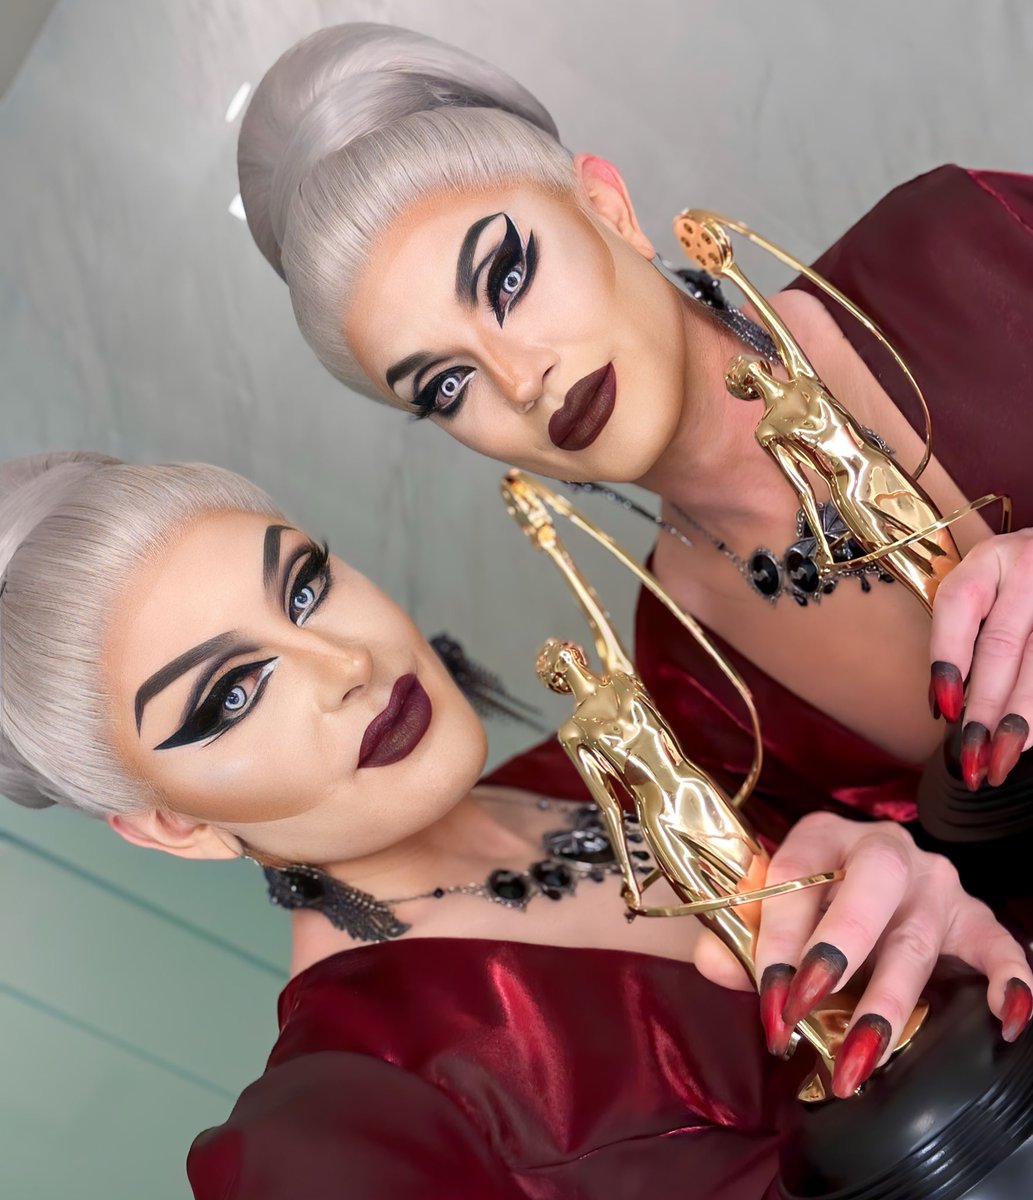 Thrilled to have won a MUAHS Award for Best Make-Up (Daytime Television / Game Show)! Huge thanks to the @MUAHSawards and local 706 guild, and to everyone who voted for us. Your support means the world to us! #MUAHSAwards #BestMakeup